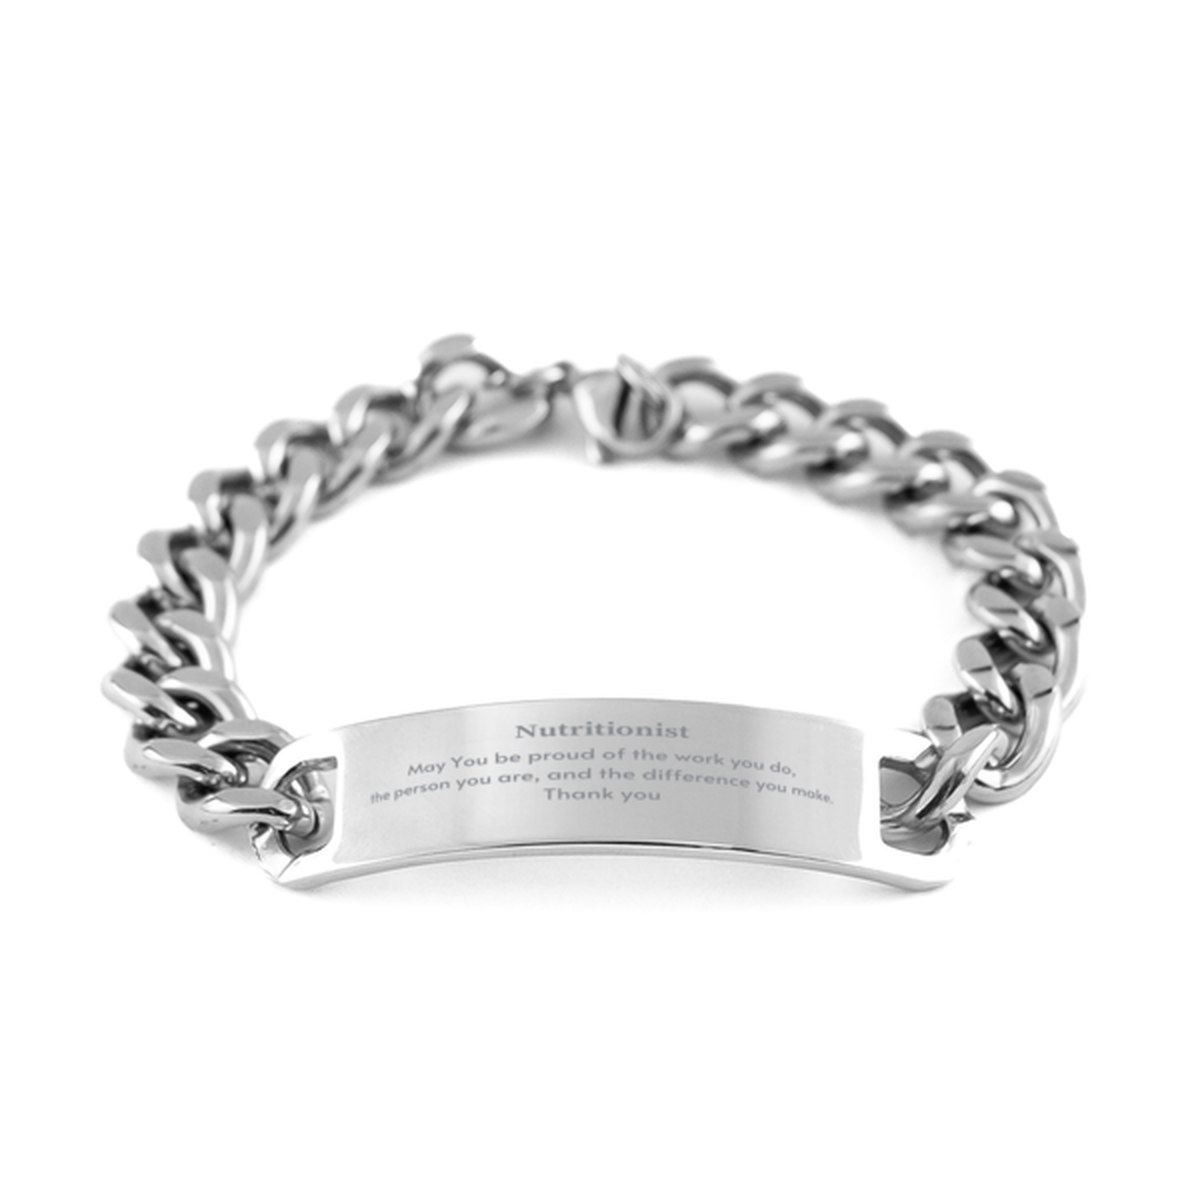 Heartwarming Cuban Chain Stainless Steel Bracelet Retirement Coworkers Gifts for Nutritionist, Nutritionist May You be proud of the work you do, the person you are Gifts for Boss Men Women Friends